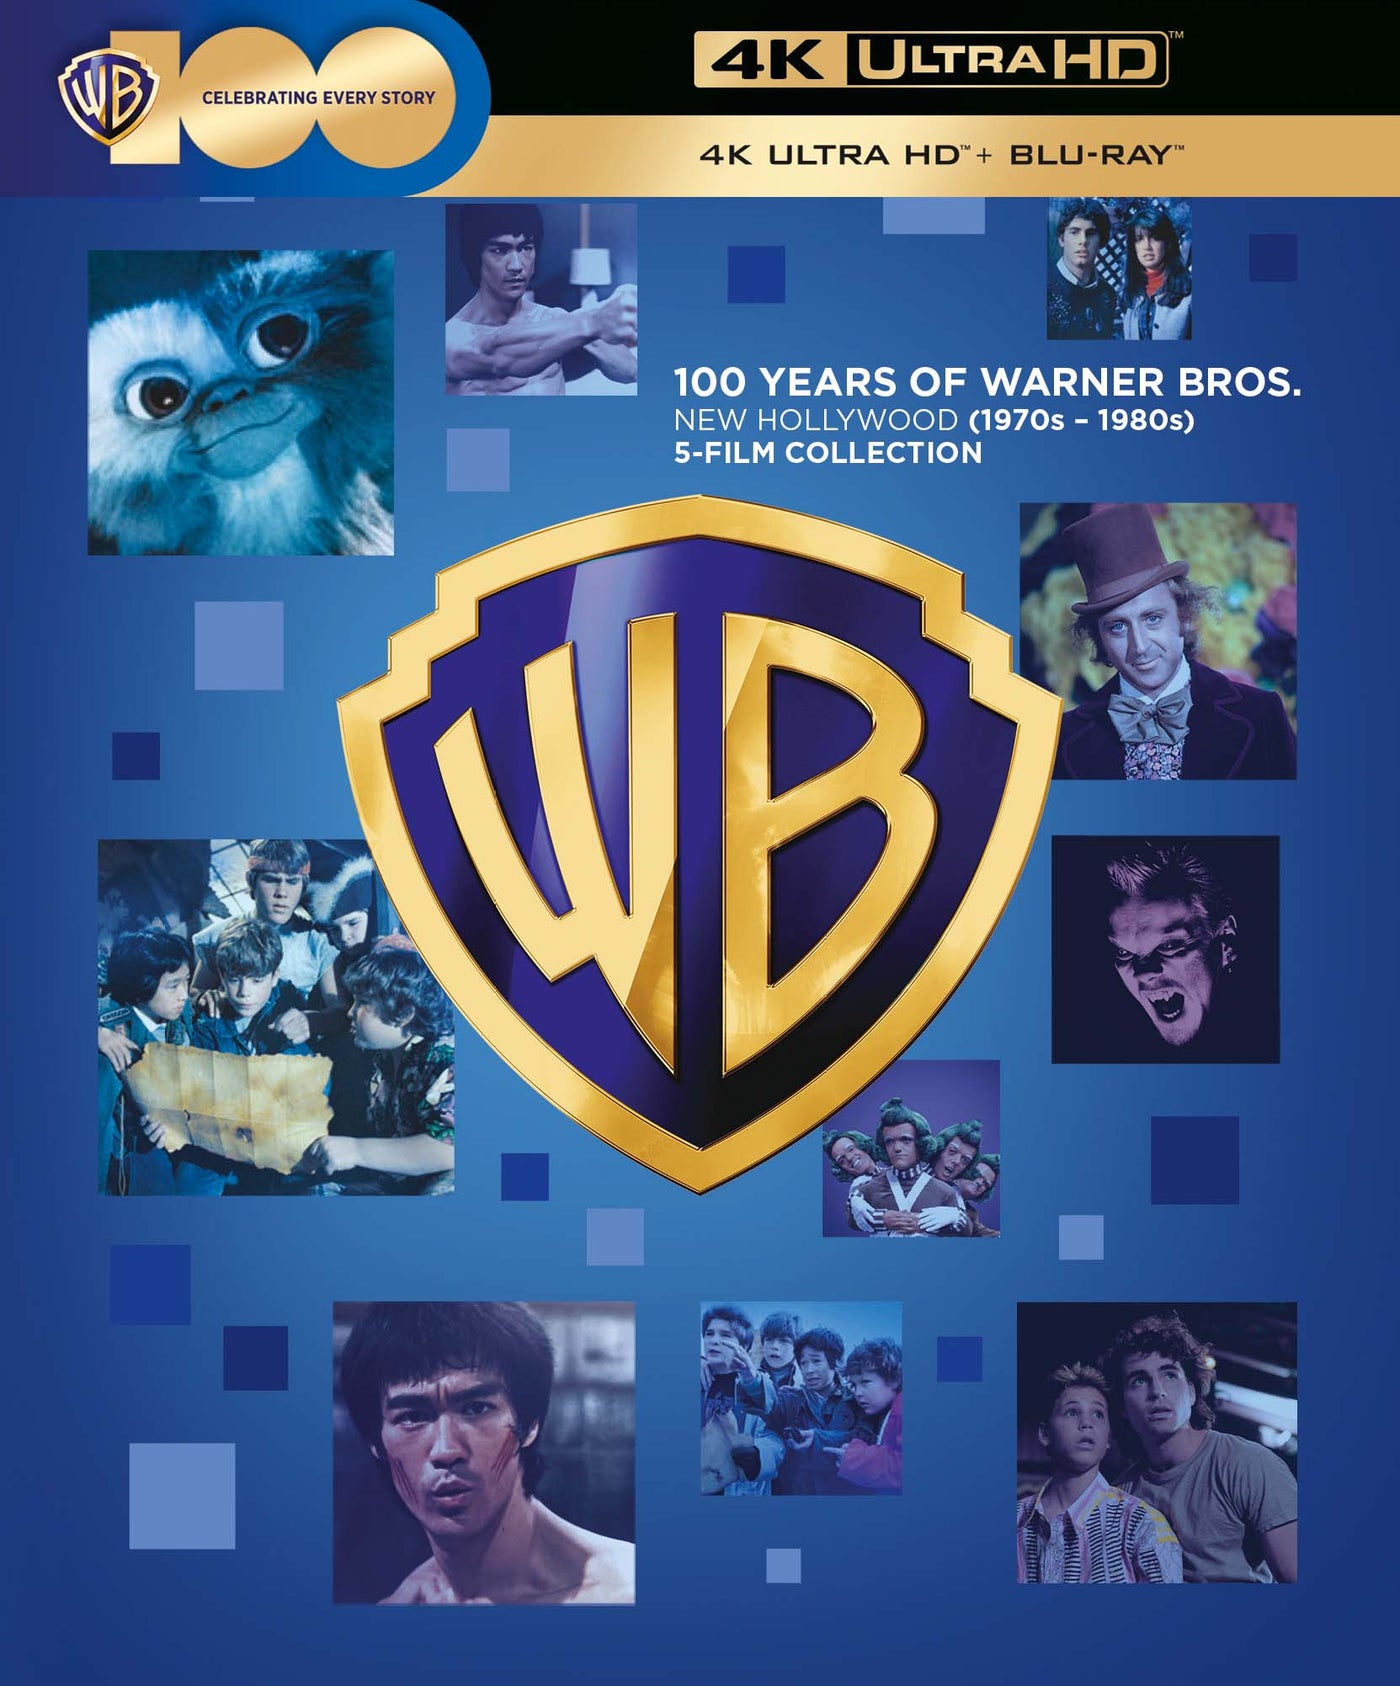 100 Years of Warner Bros. - New Hollywood 5-Film Collection (1970s - 1980s) (4K Ultra HD) (1973)